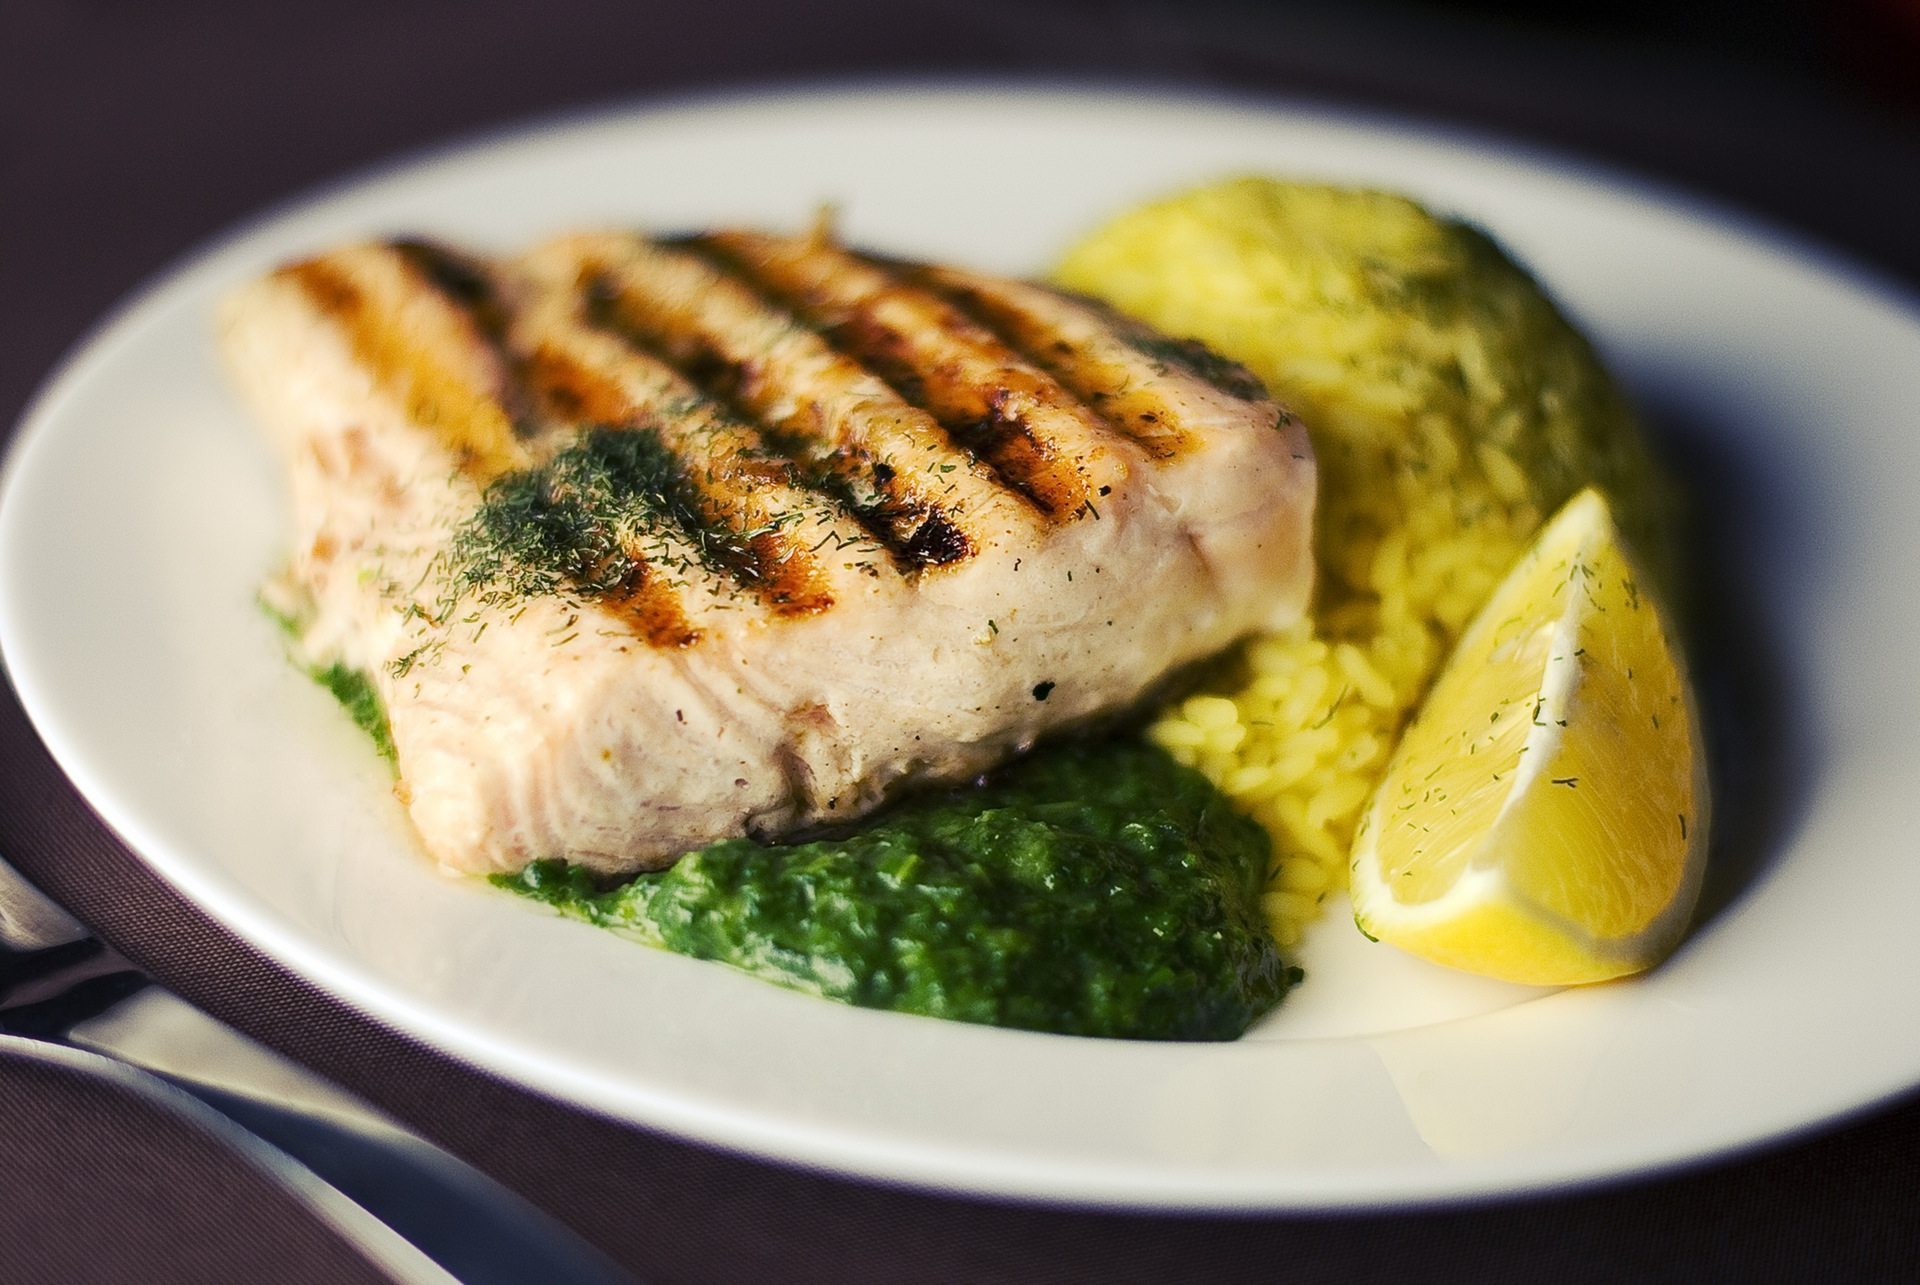 Eating baked or broiled fish once a week boost brain health